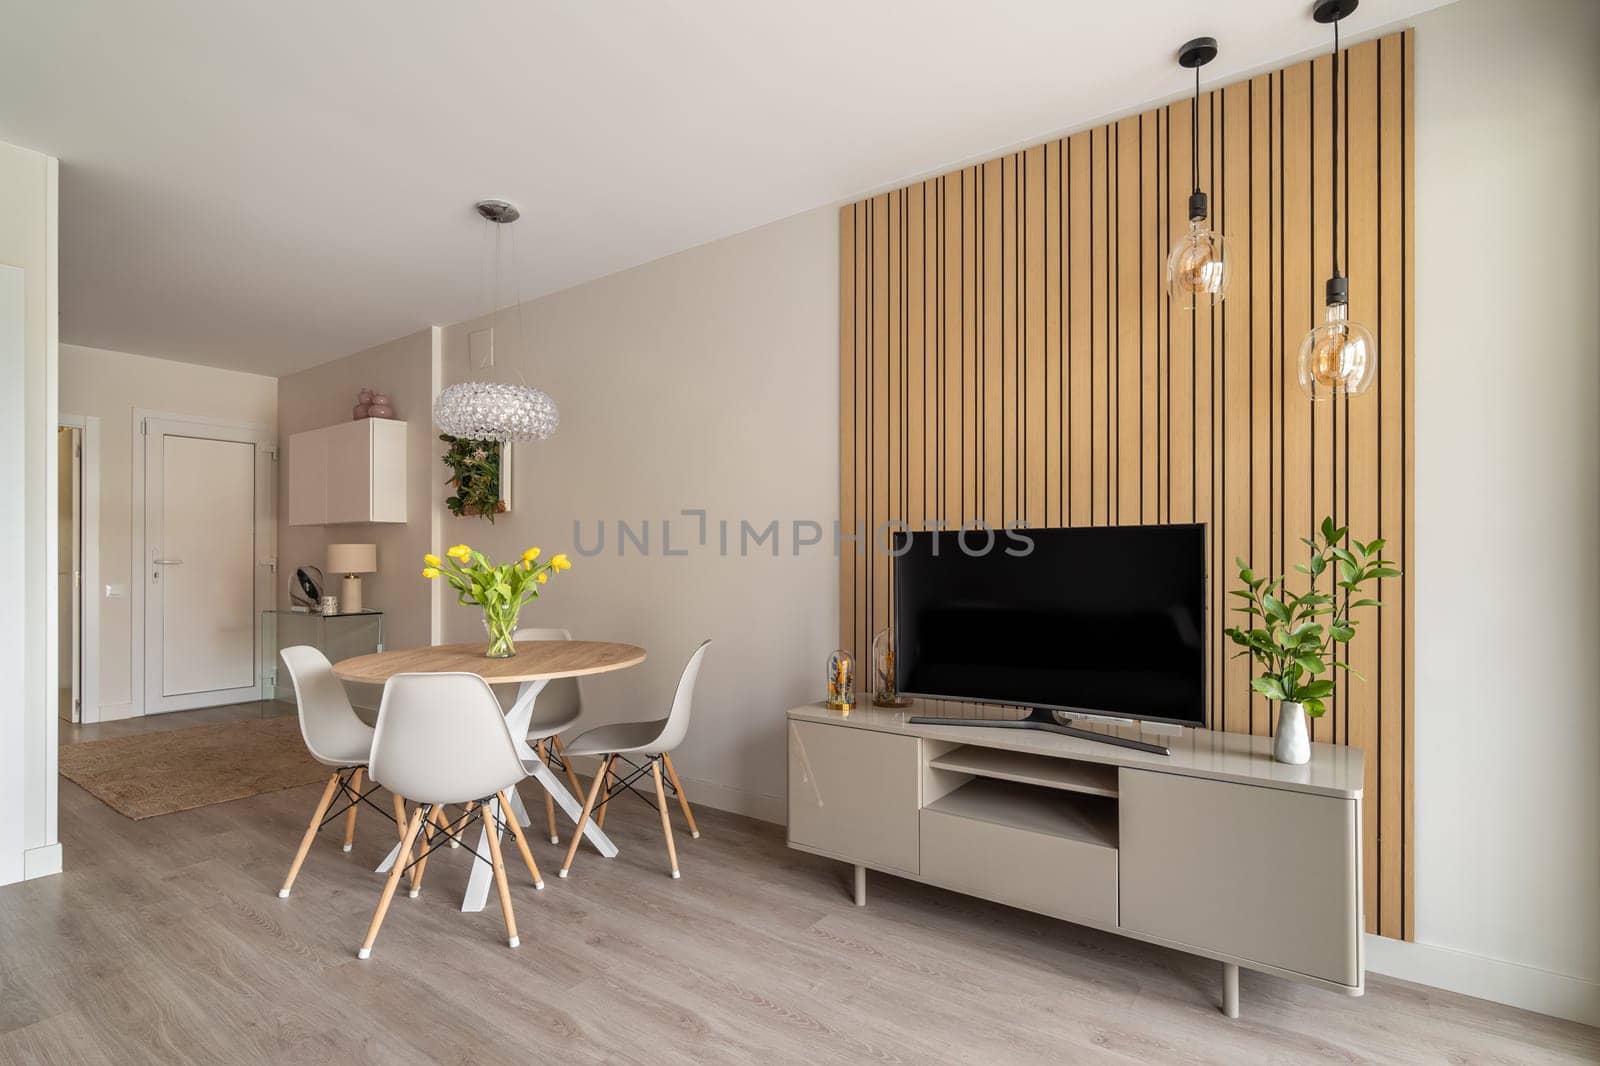 View of a modern dining area and TV wall unit, blending natural elements and contemporary design.